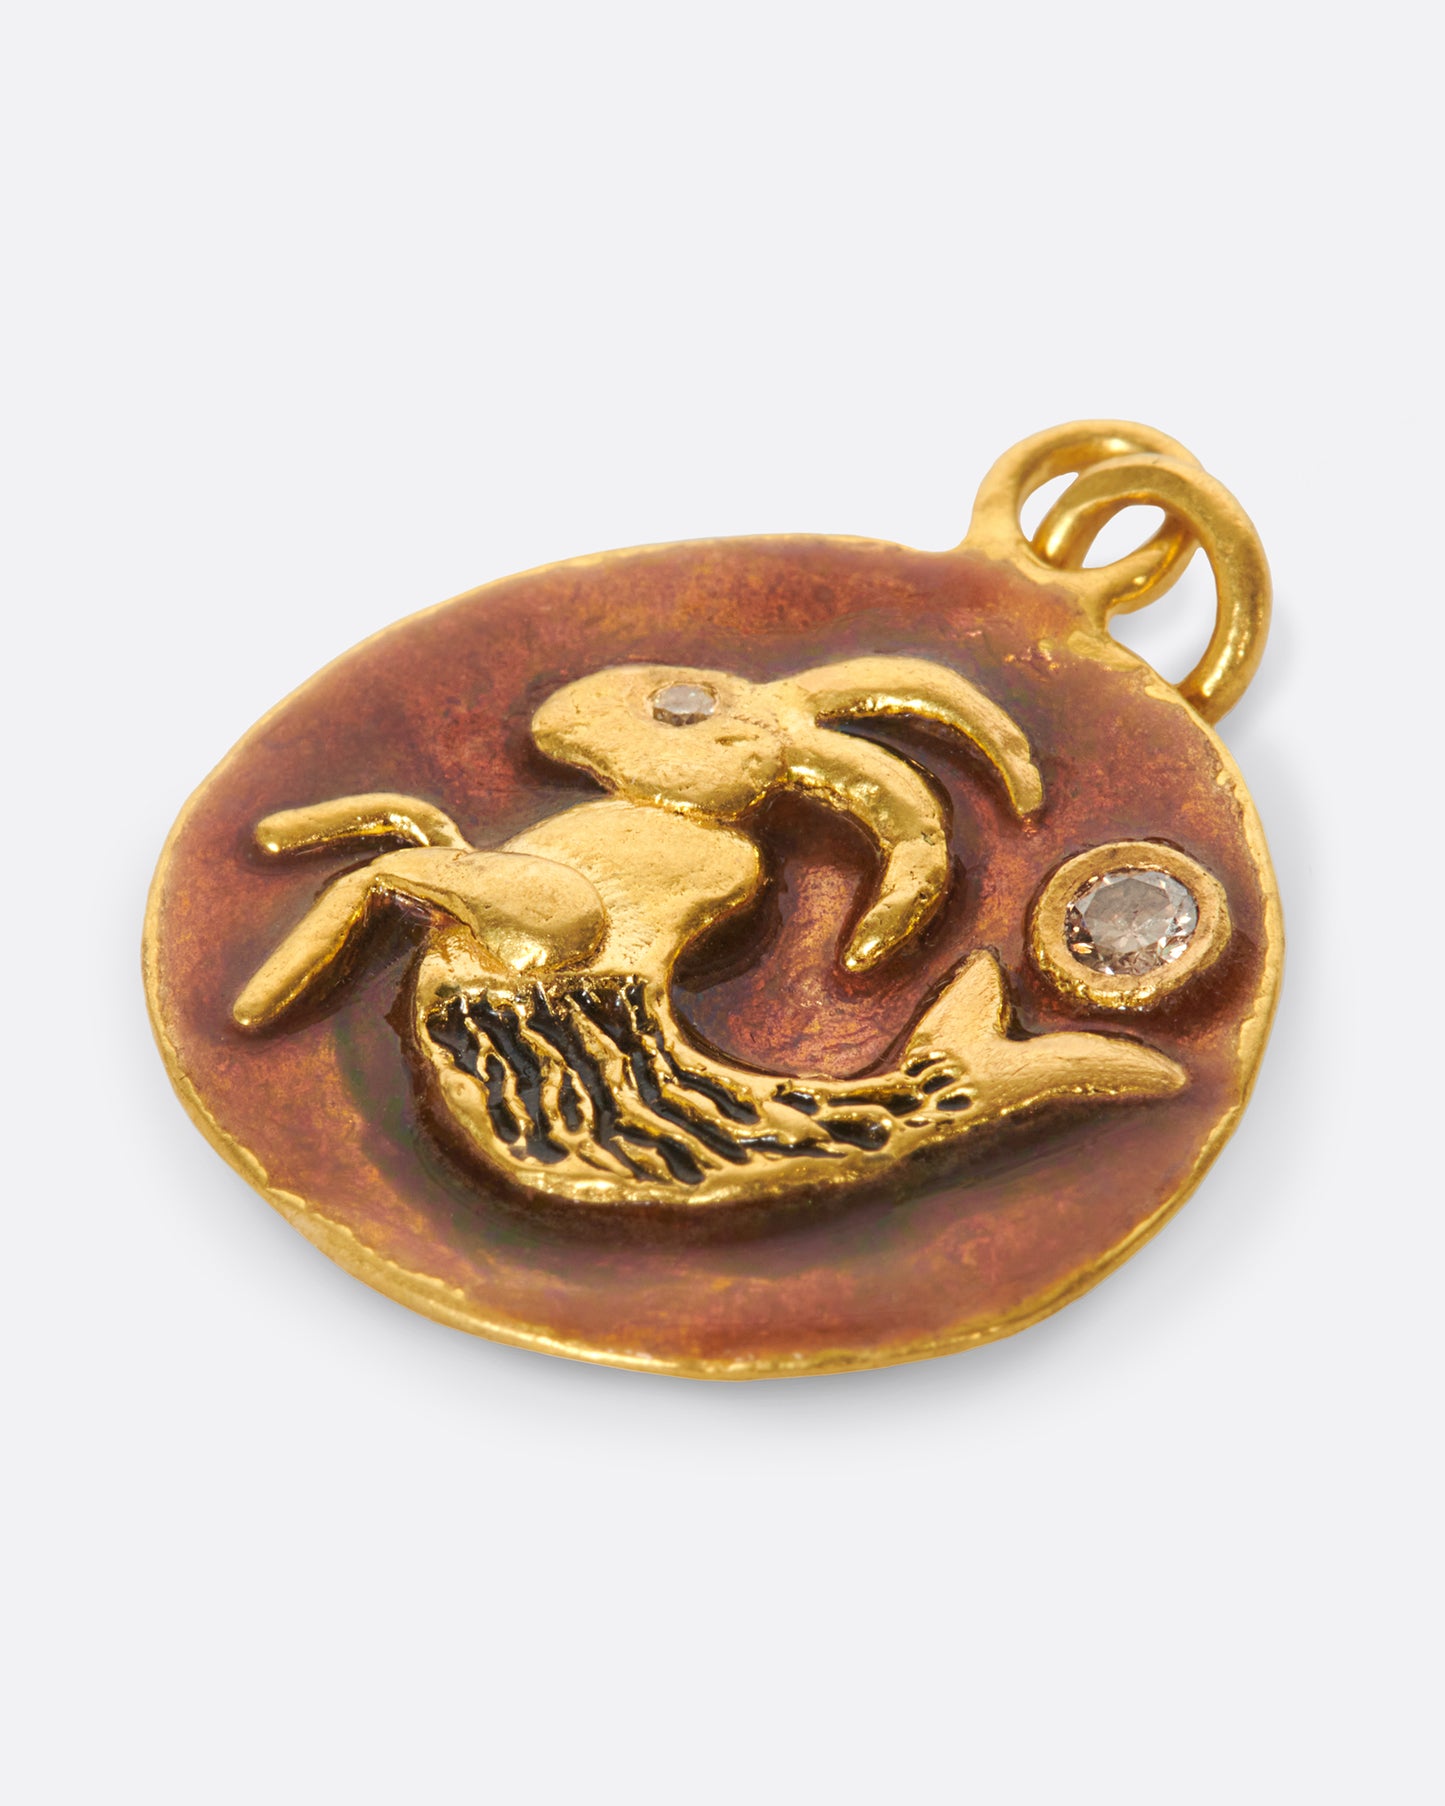 A round pendant featuring a hand-sculpted Capricorn with diamond accents.